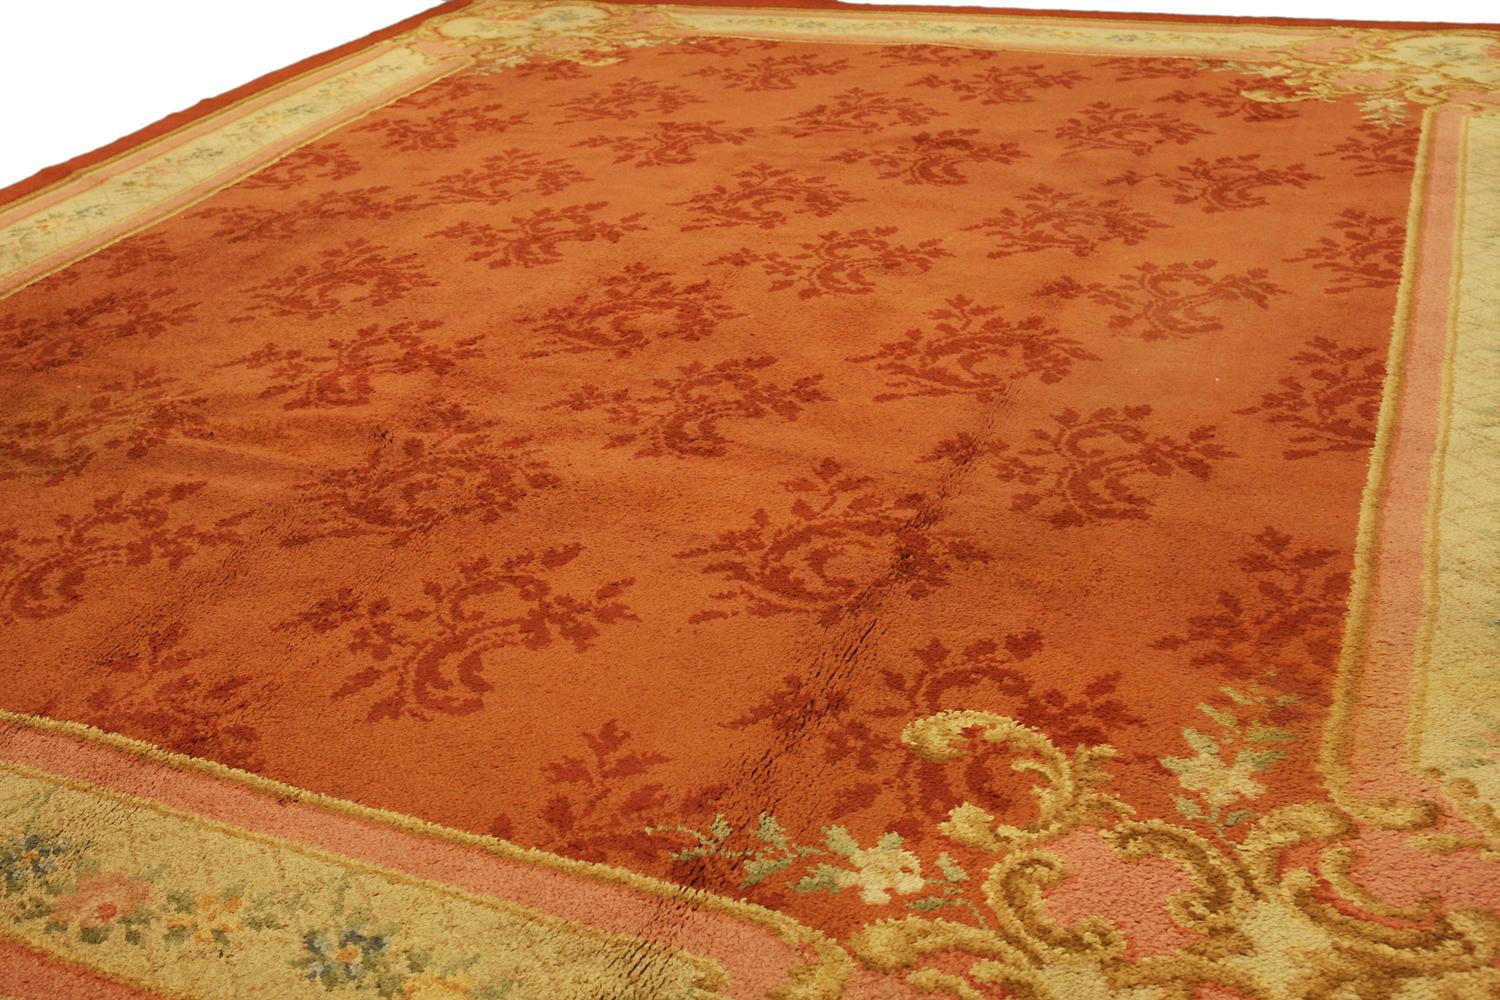 This is an antique European carpet woven in Holland circa 1900 and measures 380 x 310CM in size. this rug has a simplistic yet elegant field design that incorporates repeating shrub motifs in a slightly darker red hue compared to the softer red